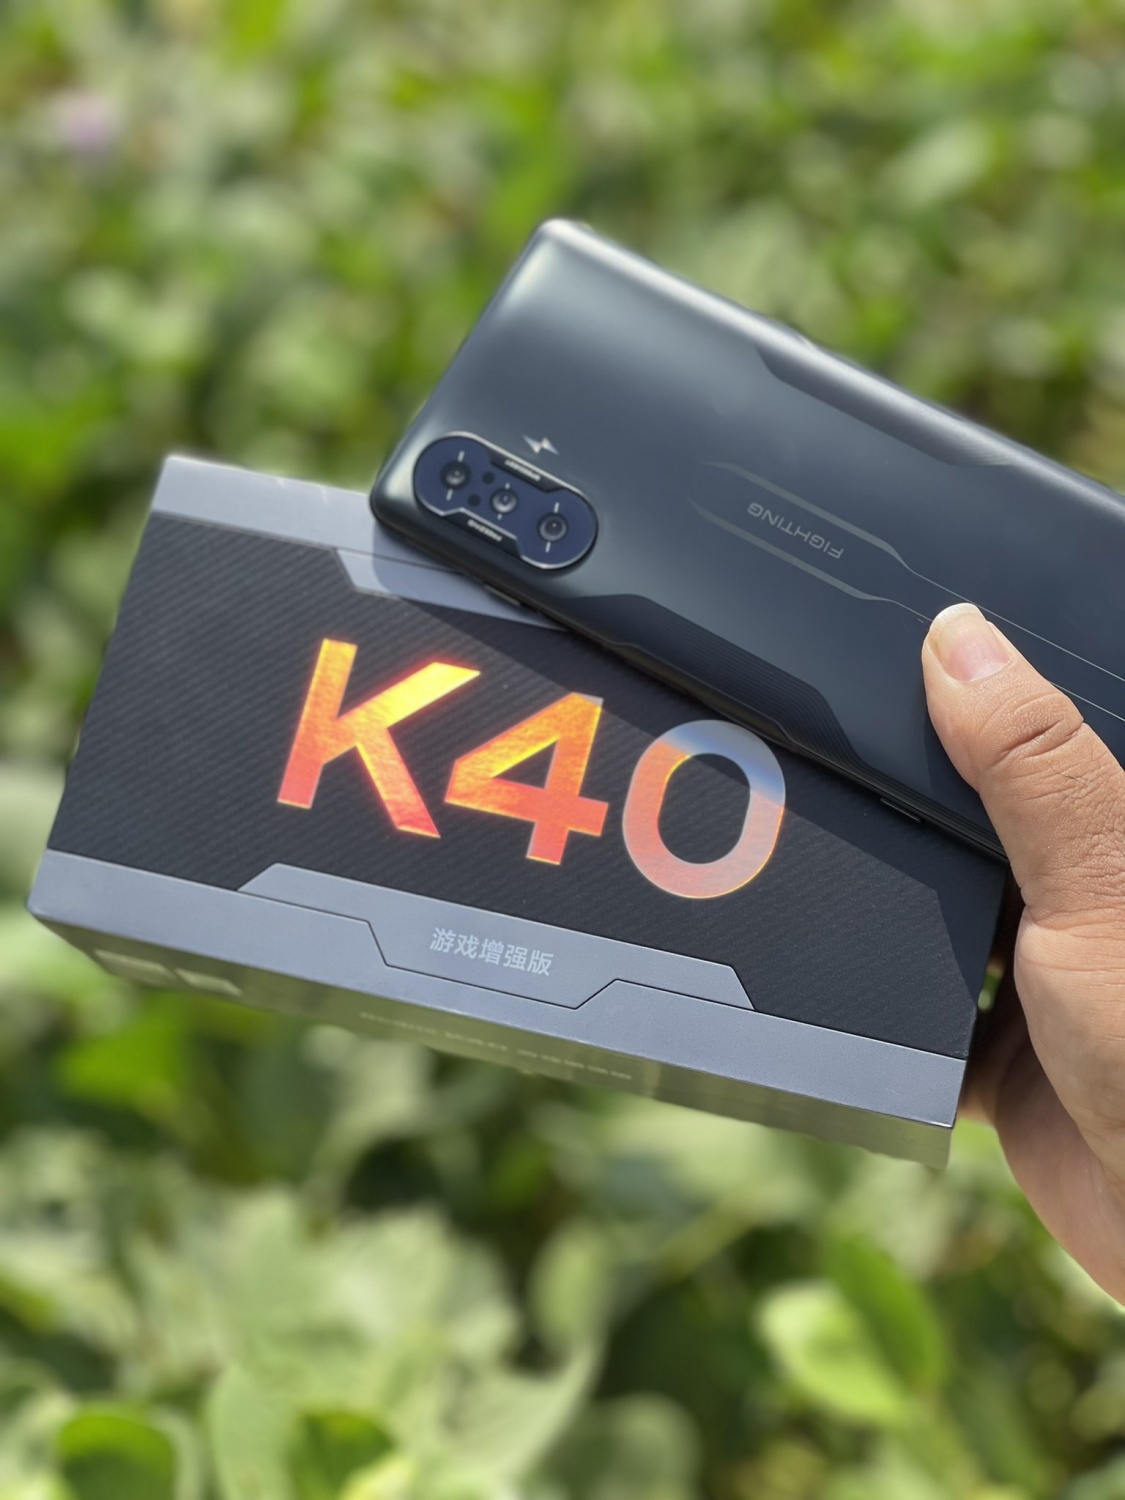 New Redmi K40 Gaming Phone Could Come With Dimensity 1100 Chipset 67w Ultra Fast Charging Leaker Reveals Key Specs Tech Times